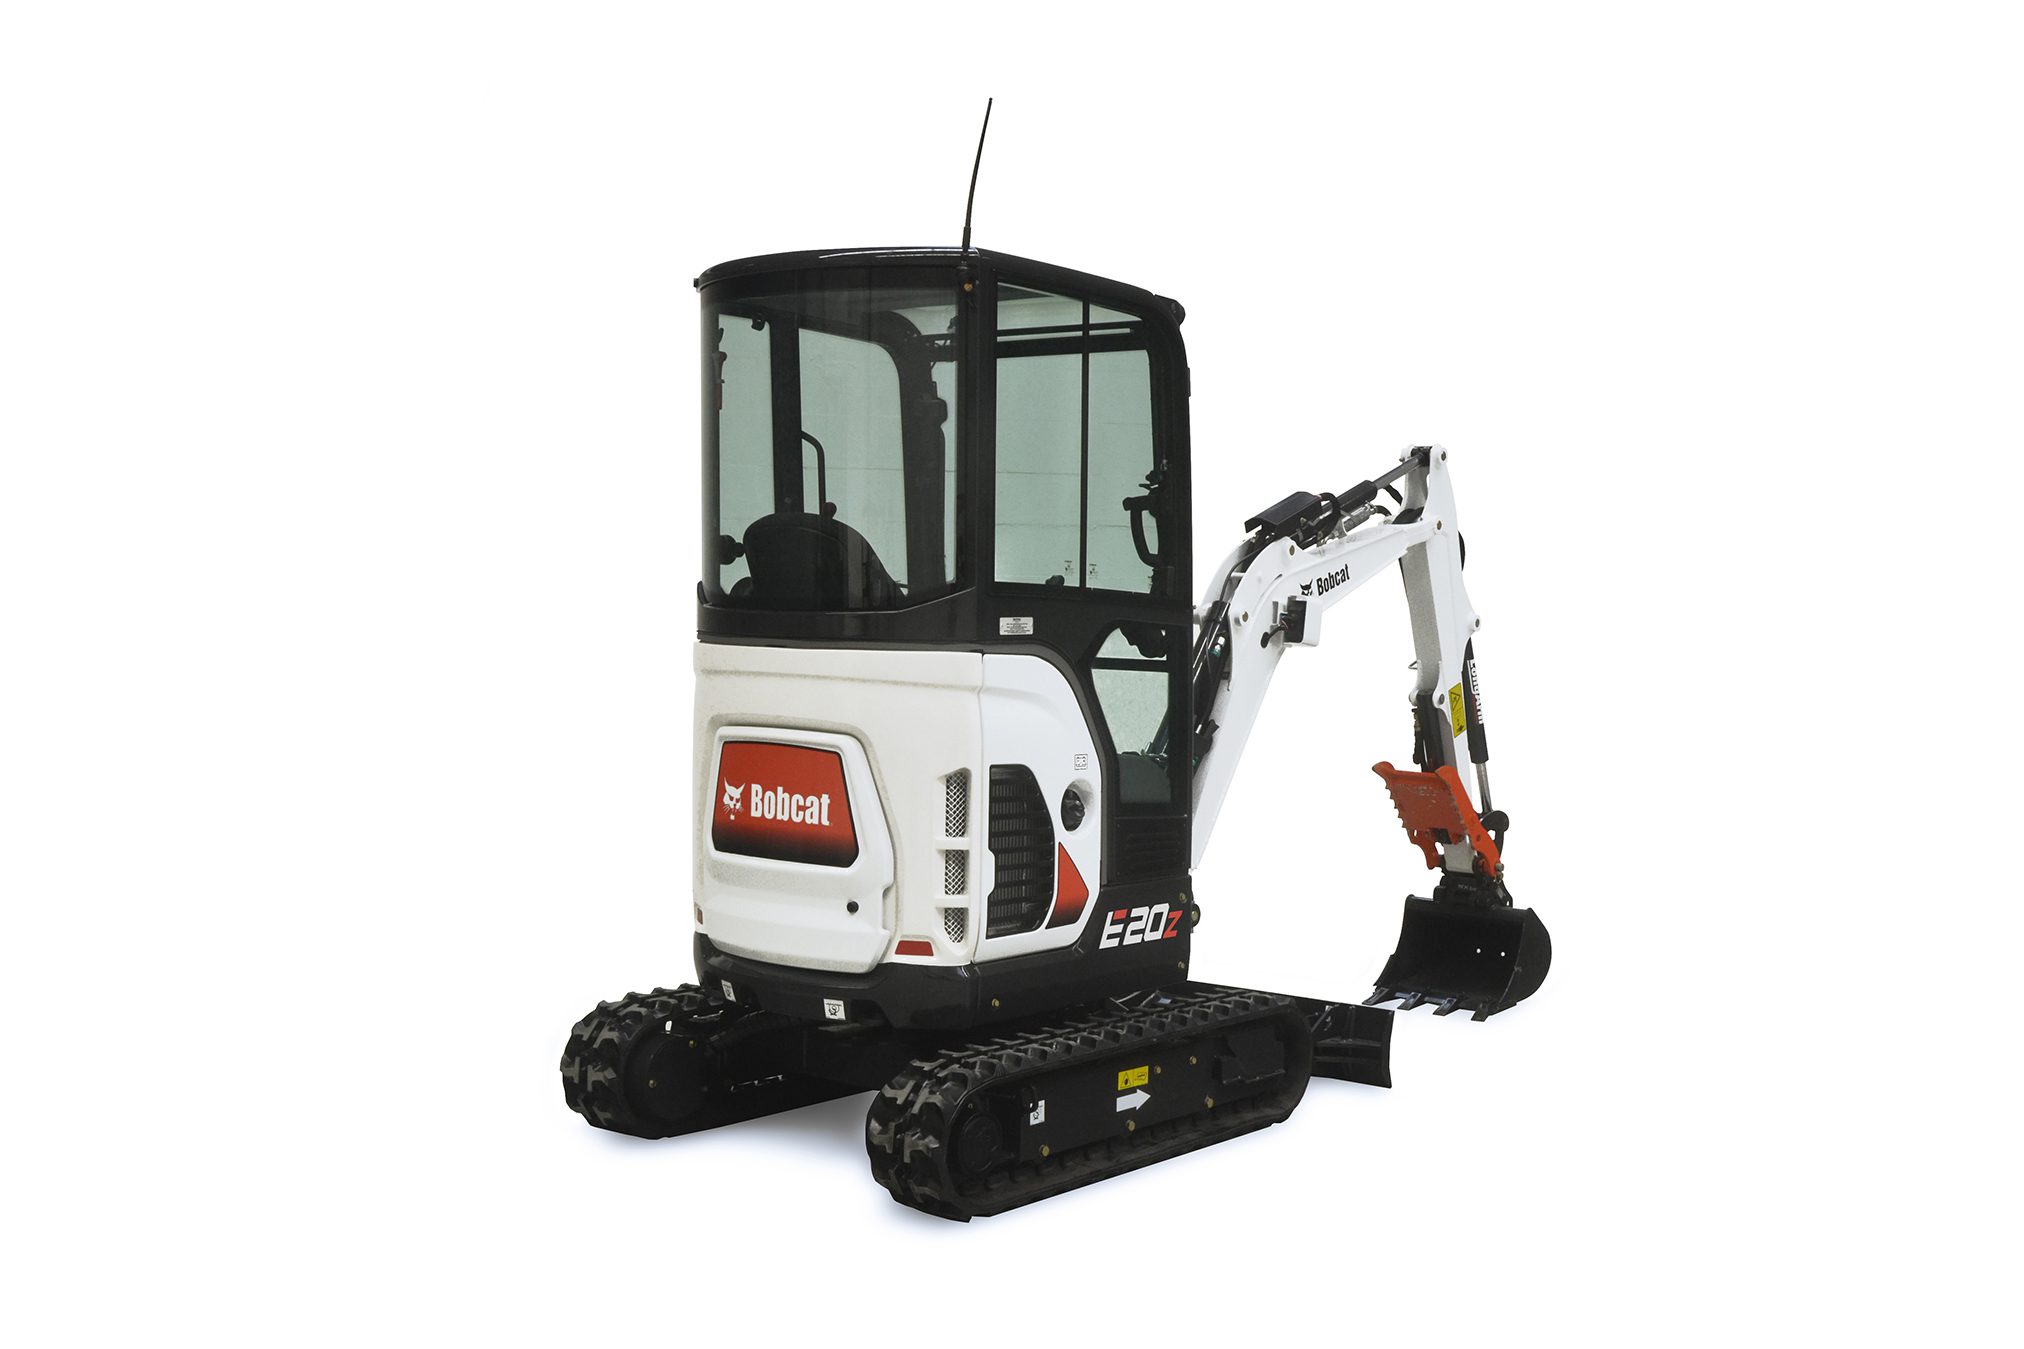 Browse Specs and more for the Bobcat E20 Compact Excavator - Bobcat of Indy